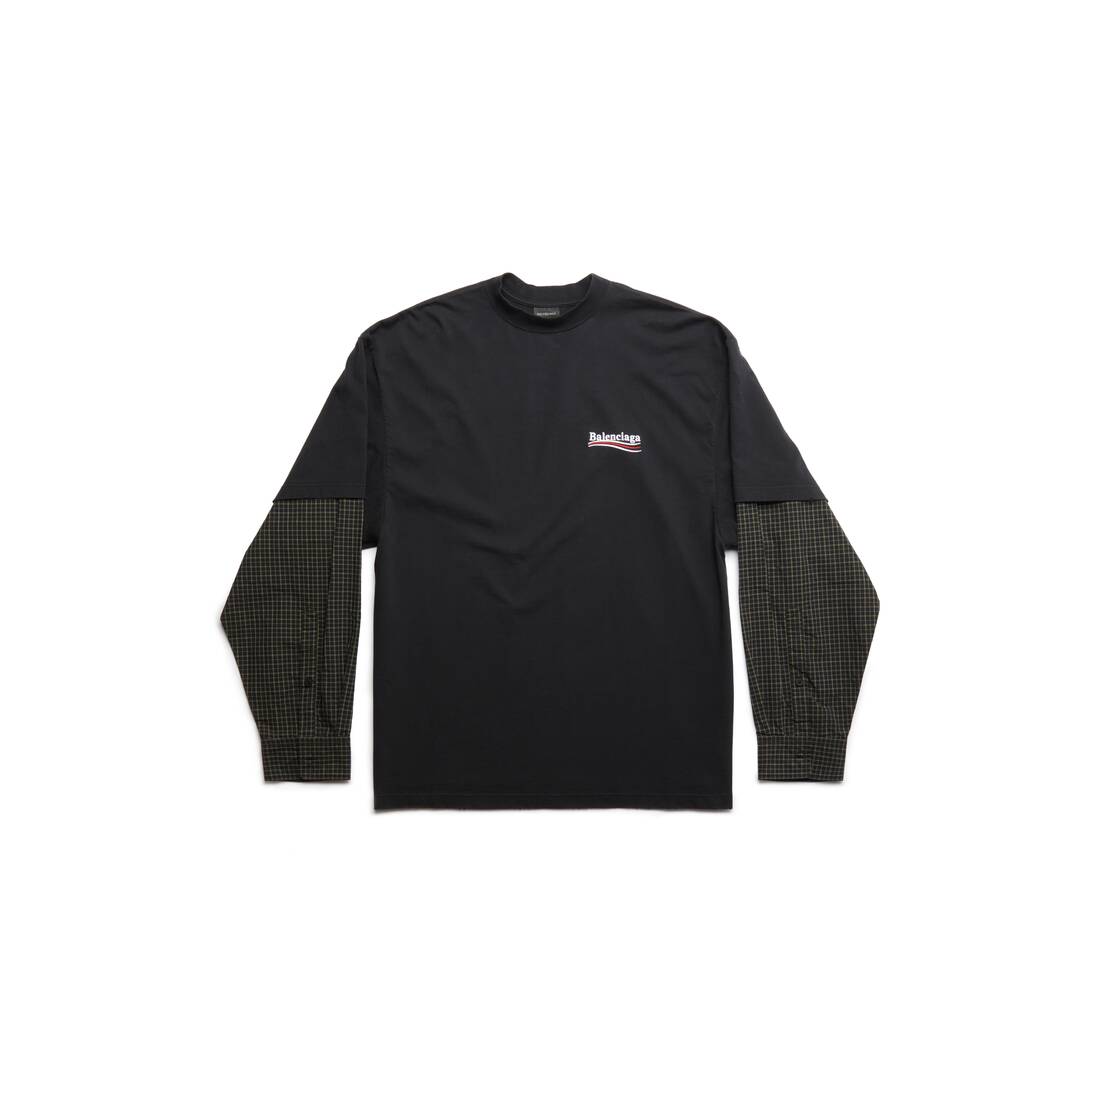 Men's Political Campaign Layered T-shirt Oversized in Black Faded